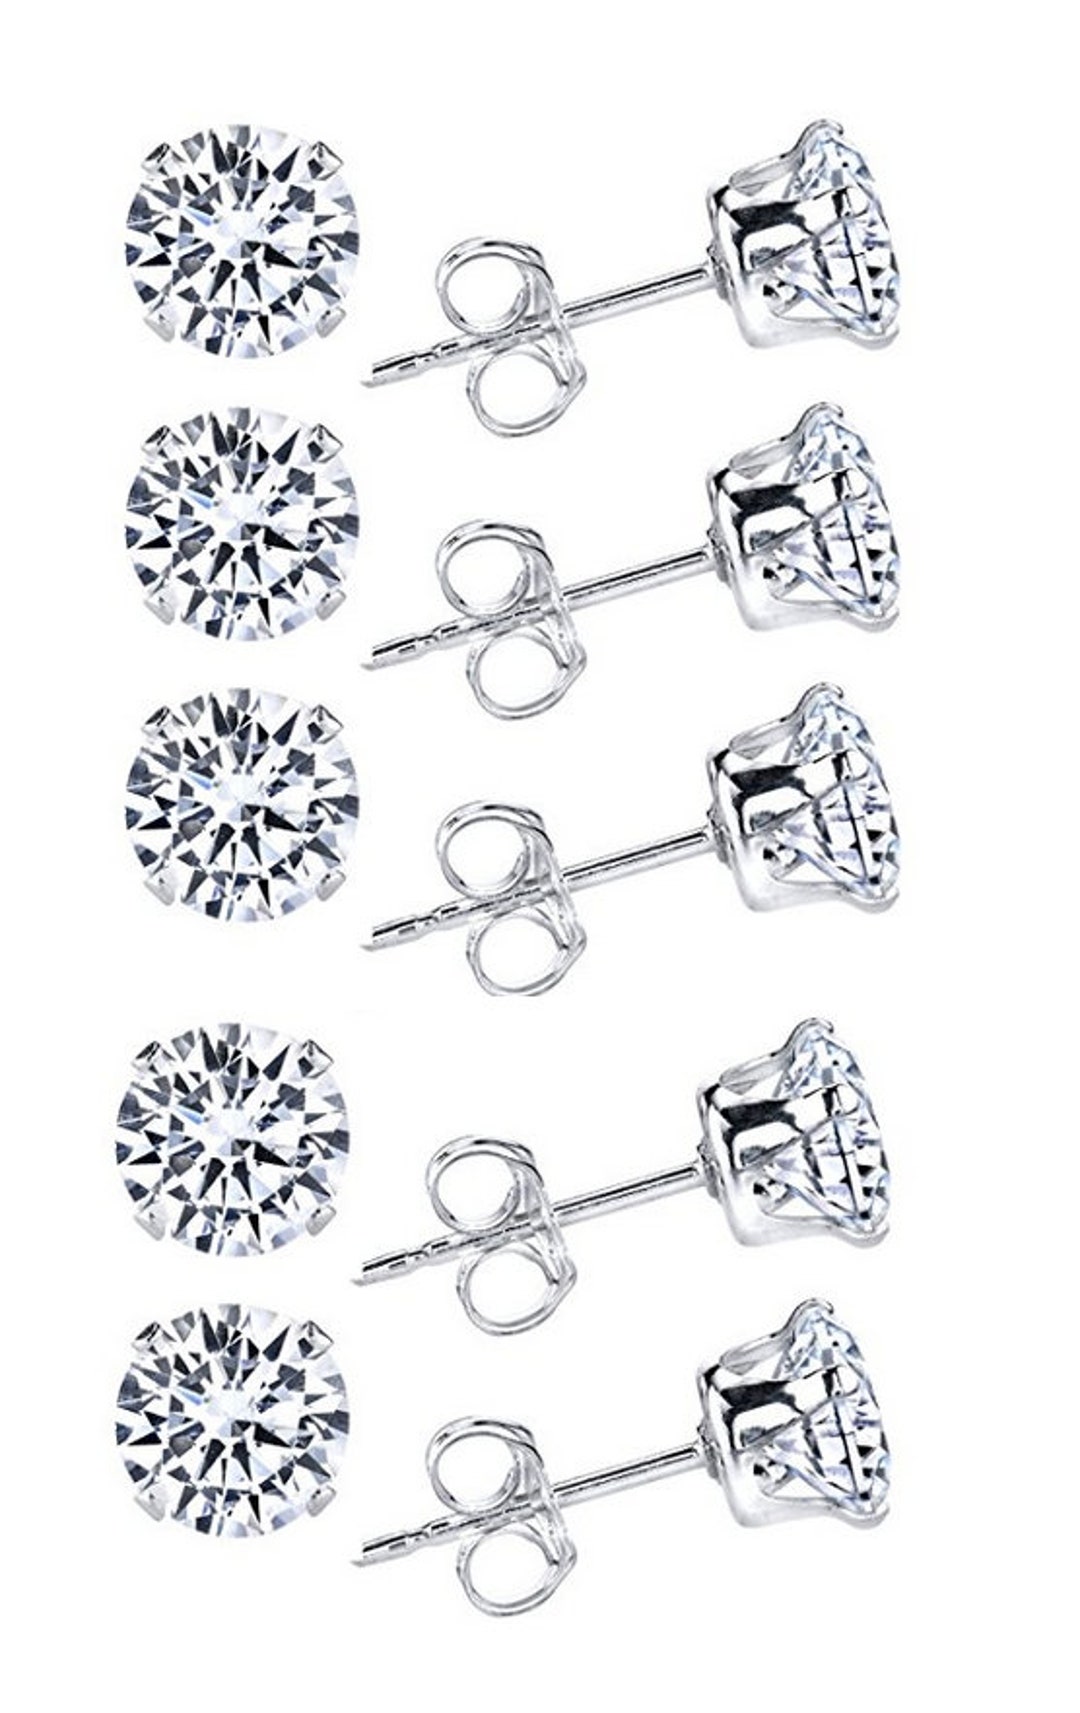 Sterling Silver 3.0 Mm Round CZ Stud Earrings Pack of 5 - Etsy